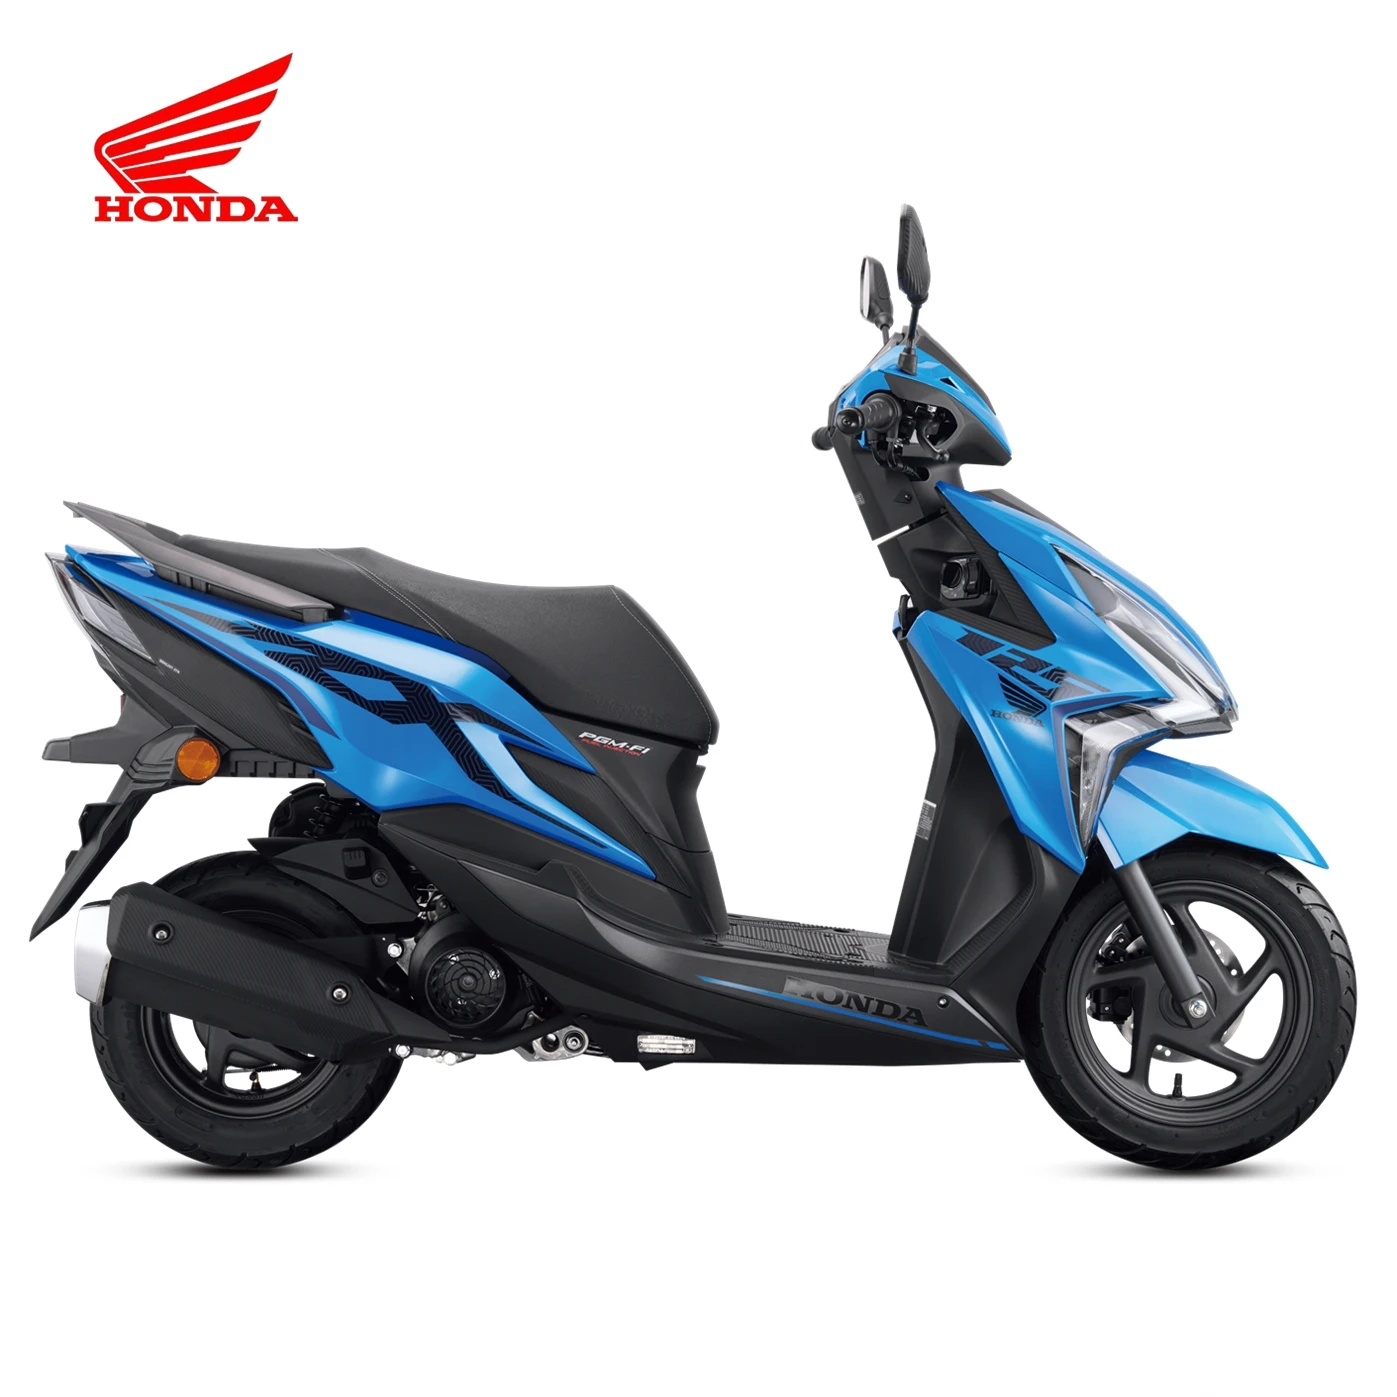 høflighed Bekræfte Imperialisme Hot Honda Motorcycle Rx125 Scoopy Forza Pcx Scooter - Buy Honda Scooter, Honda Rx125 (elite 125 ),Honda Motorcycle Rx125 Scoopy Forza Pcx Scooter  Product on Alibaba.com